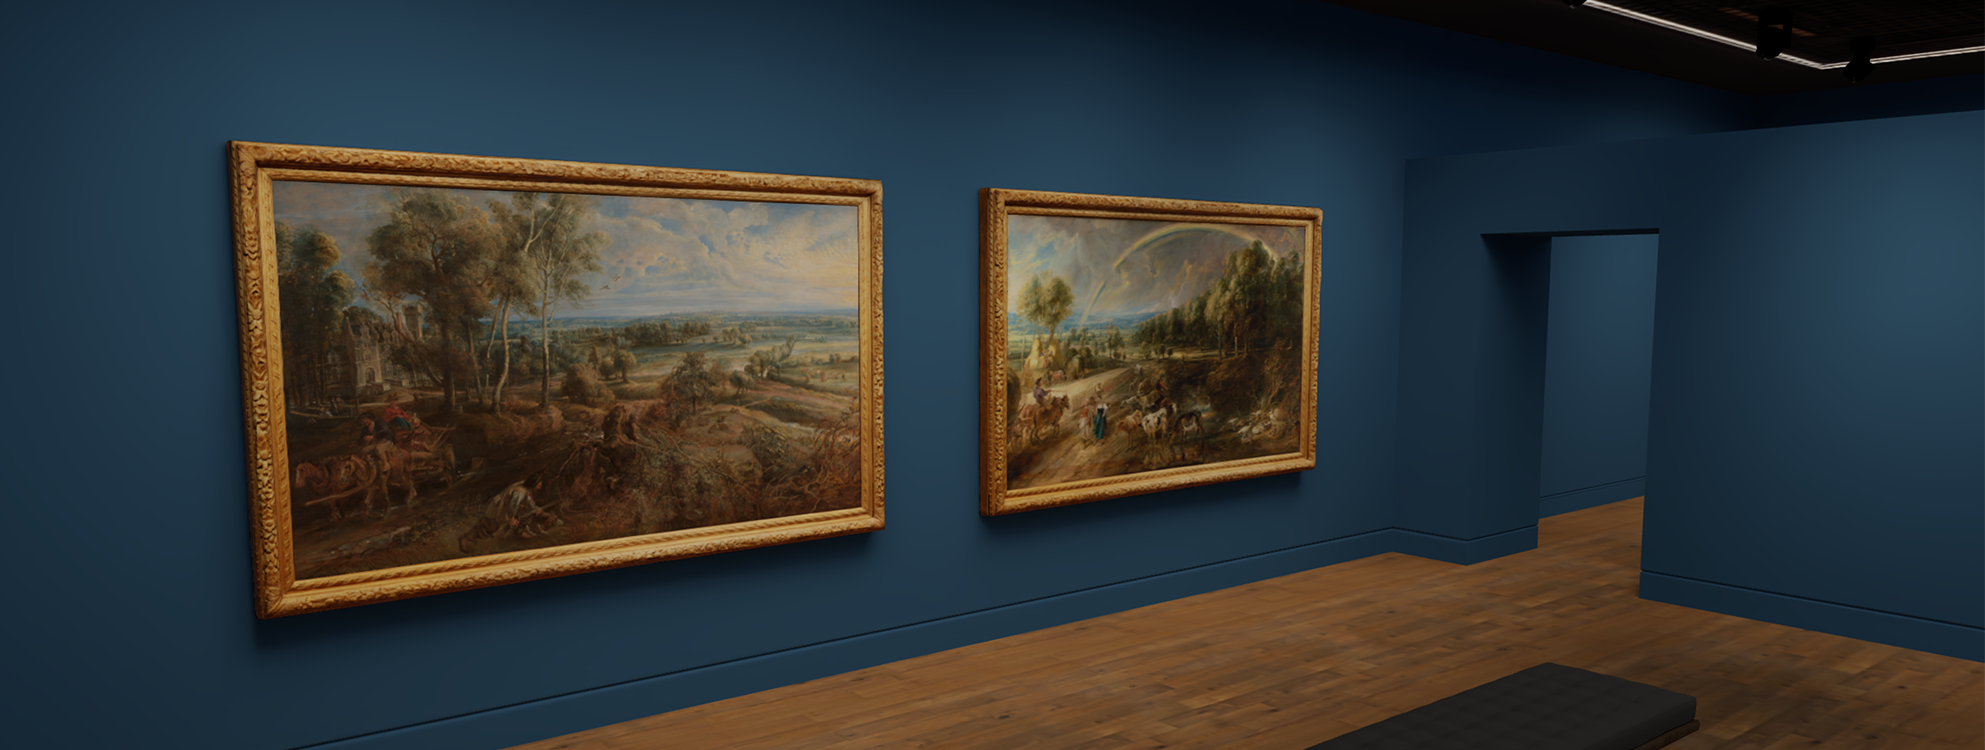 an image showing Rubens paintings in the Wallace Collection, in a virtual gallery.